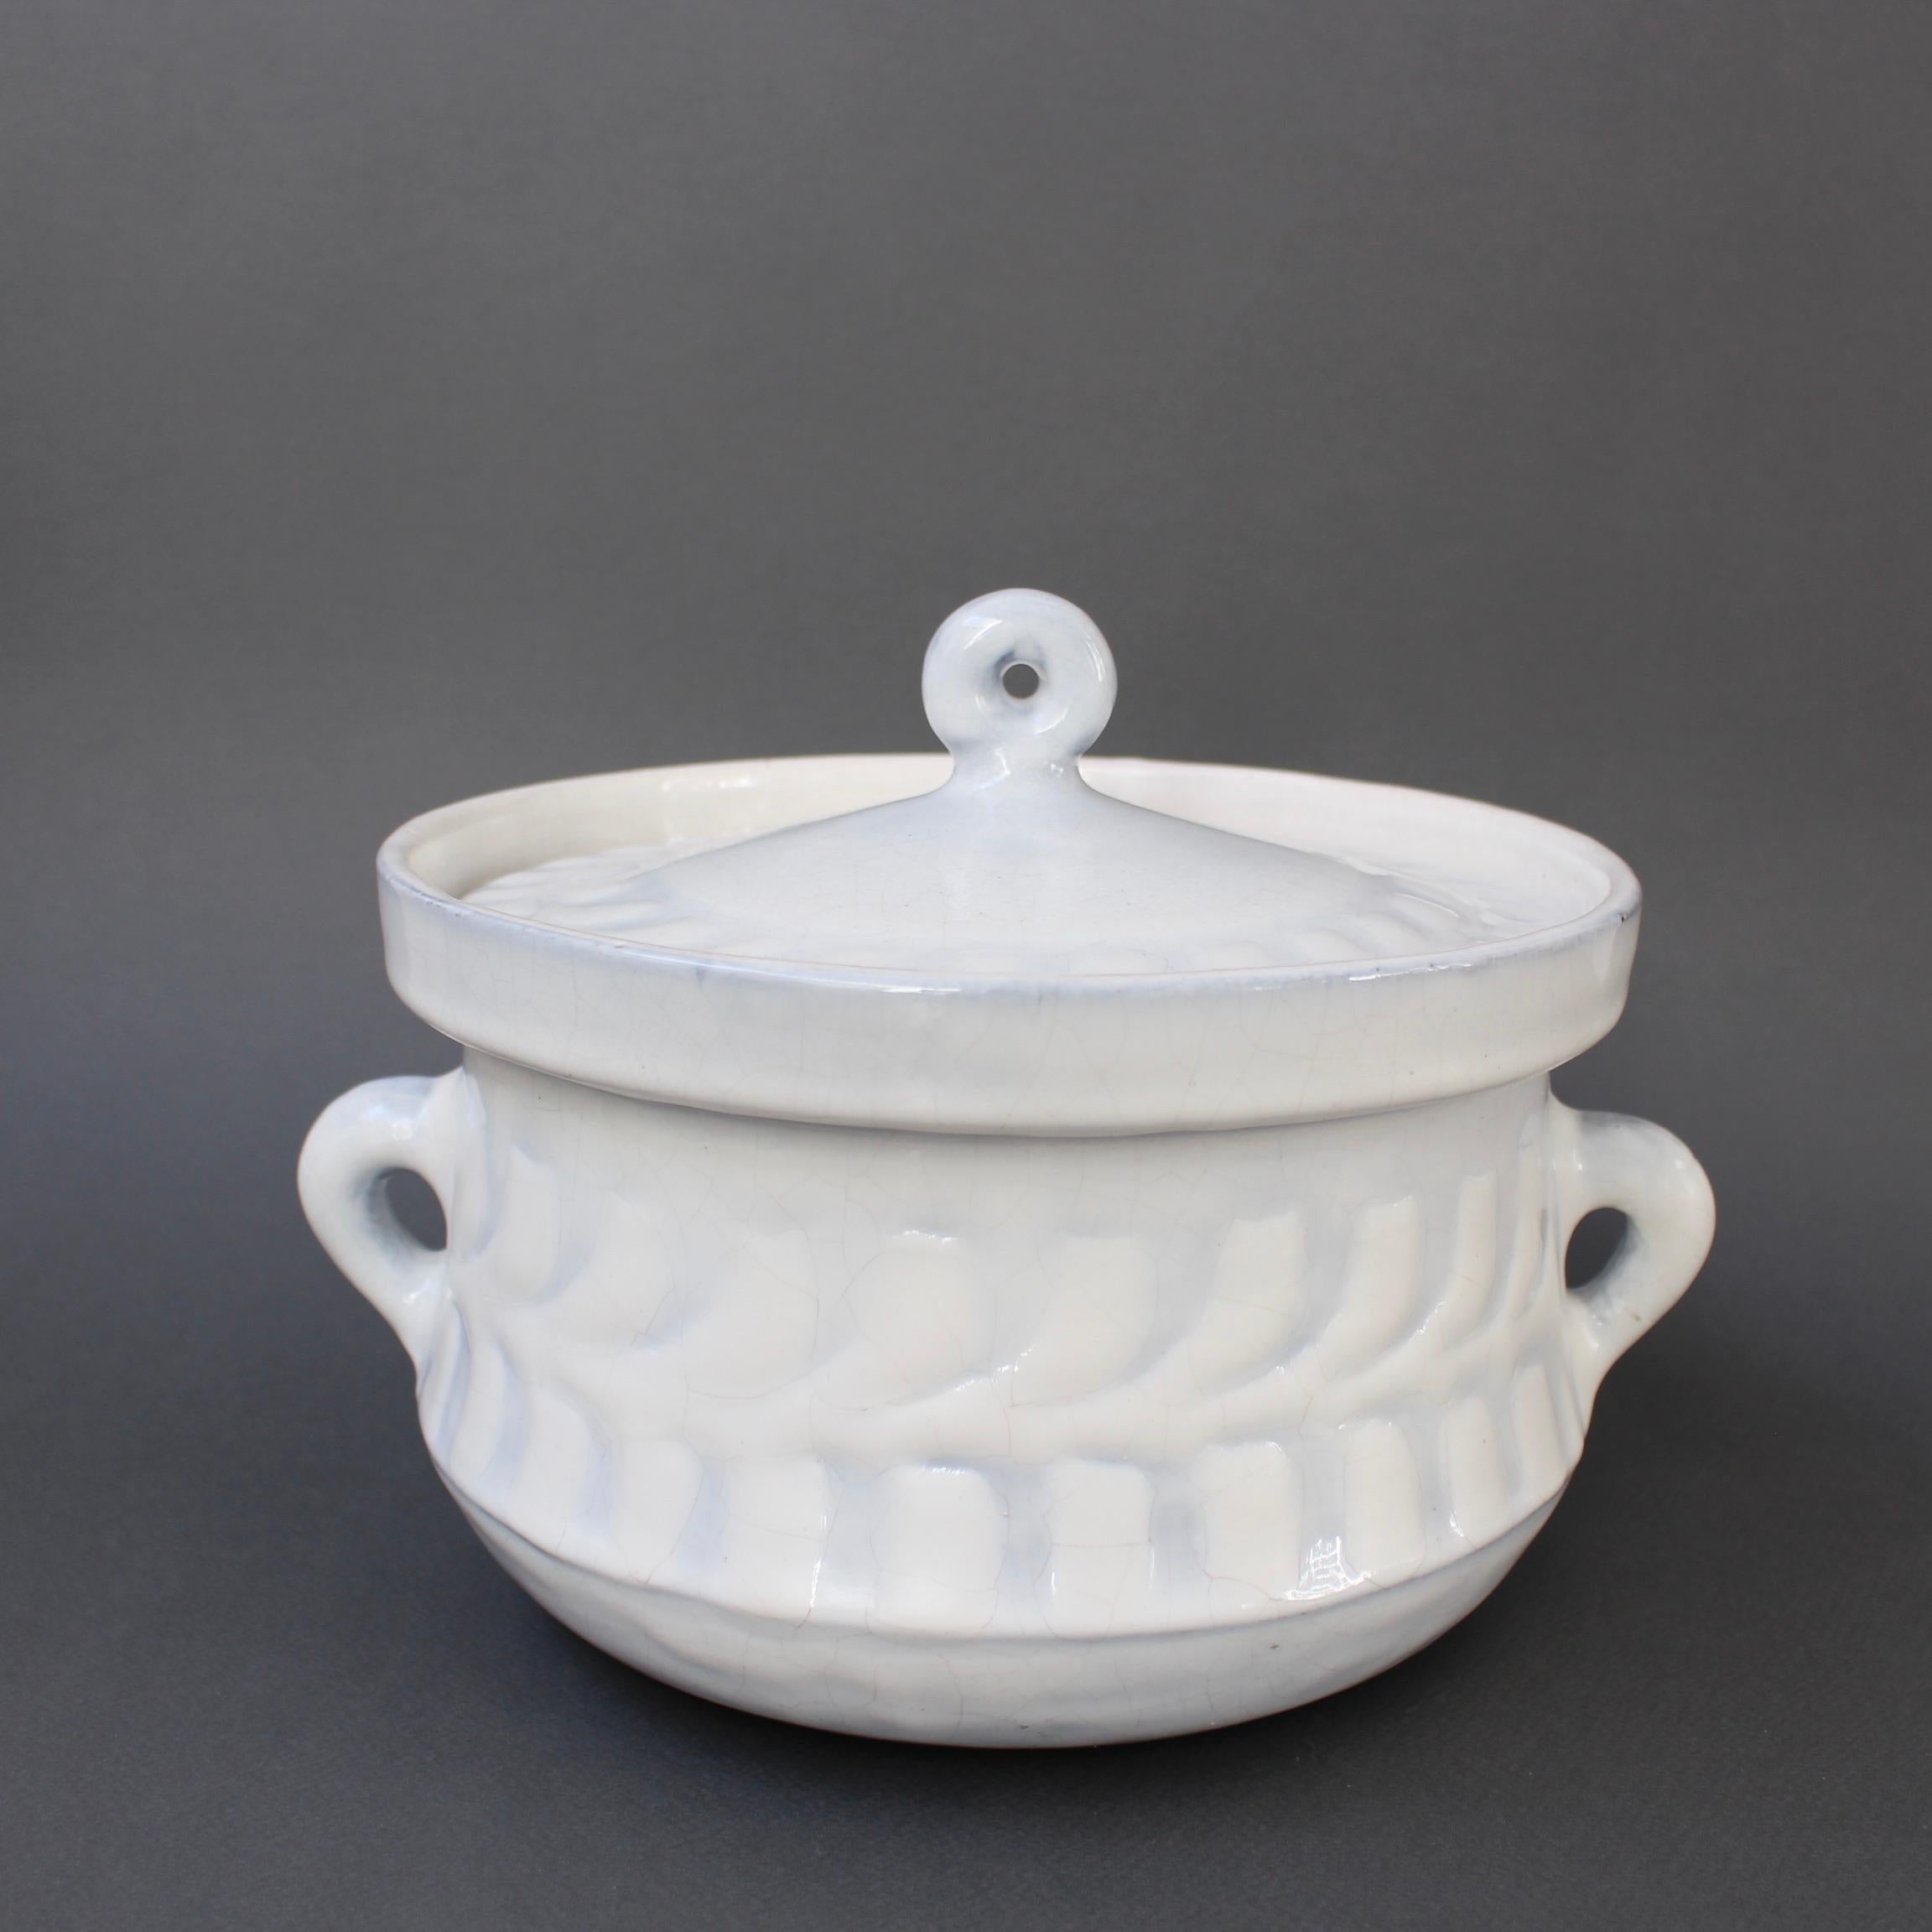 Vintage French ceramic tureen by Roger Capron (circa 1960s). A luscious creamy white base with subtle grey-blue hues in the repeating décor pattern is graceful and charming all at once - elegant in all its simplicity. The bowl has handles on both